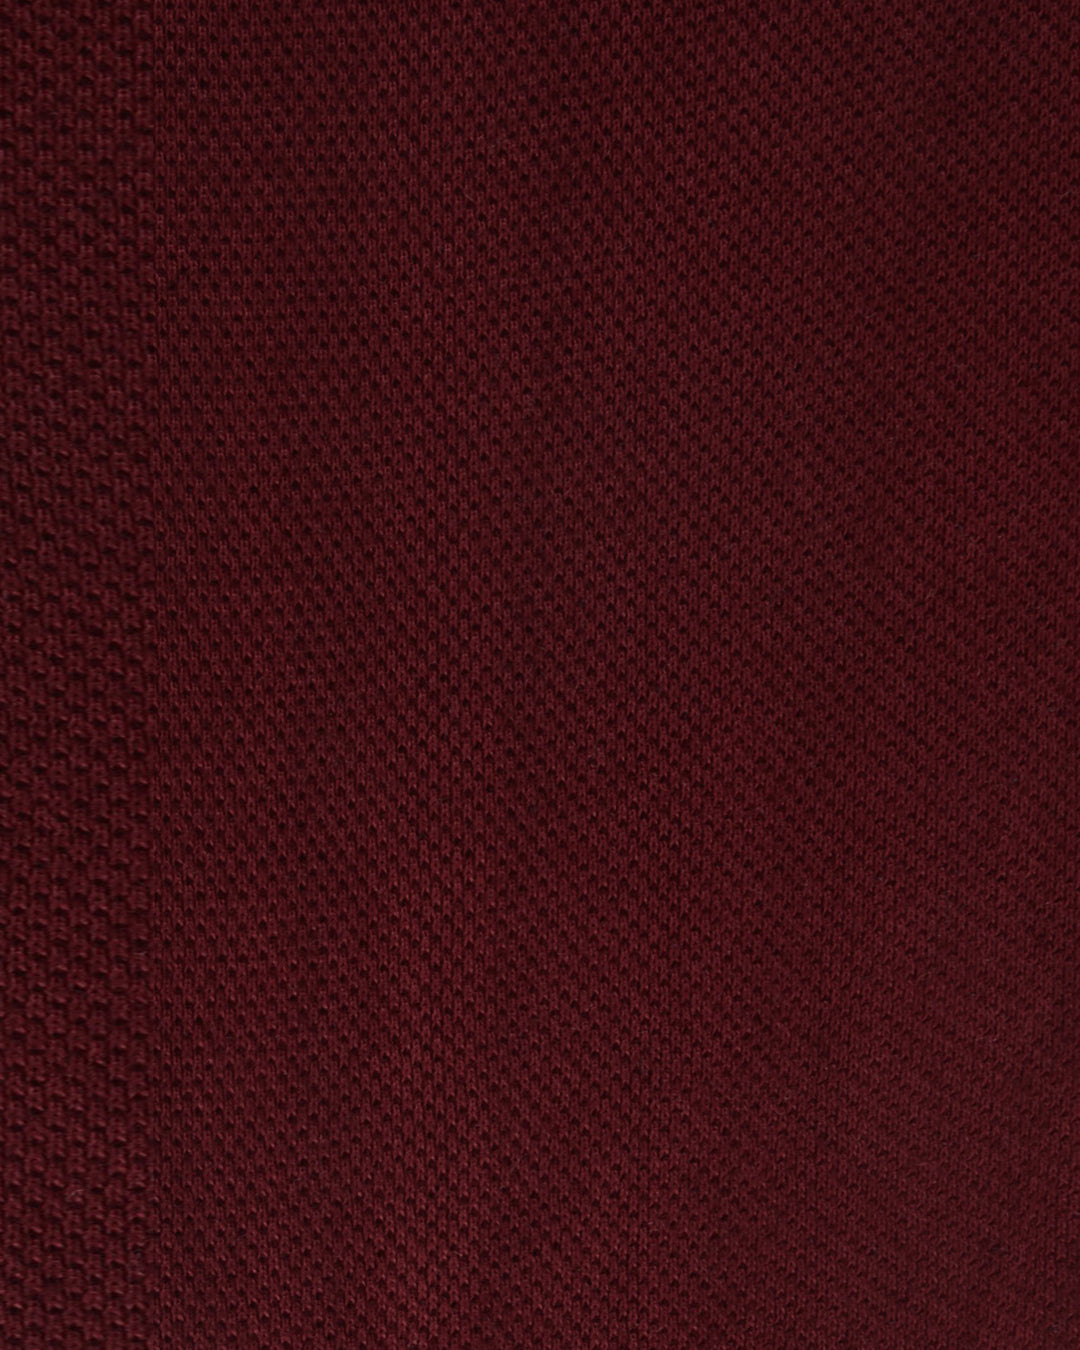 Close up of the custom oxford polo shirt for men by Luxire in maroon